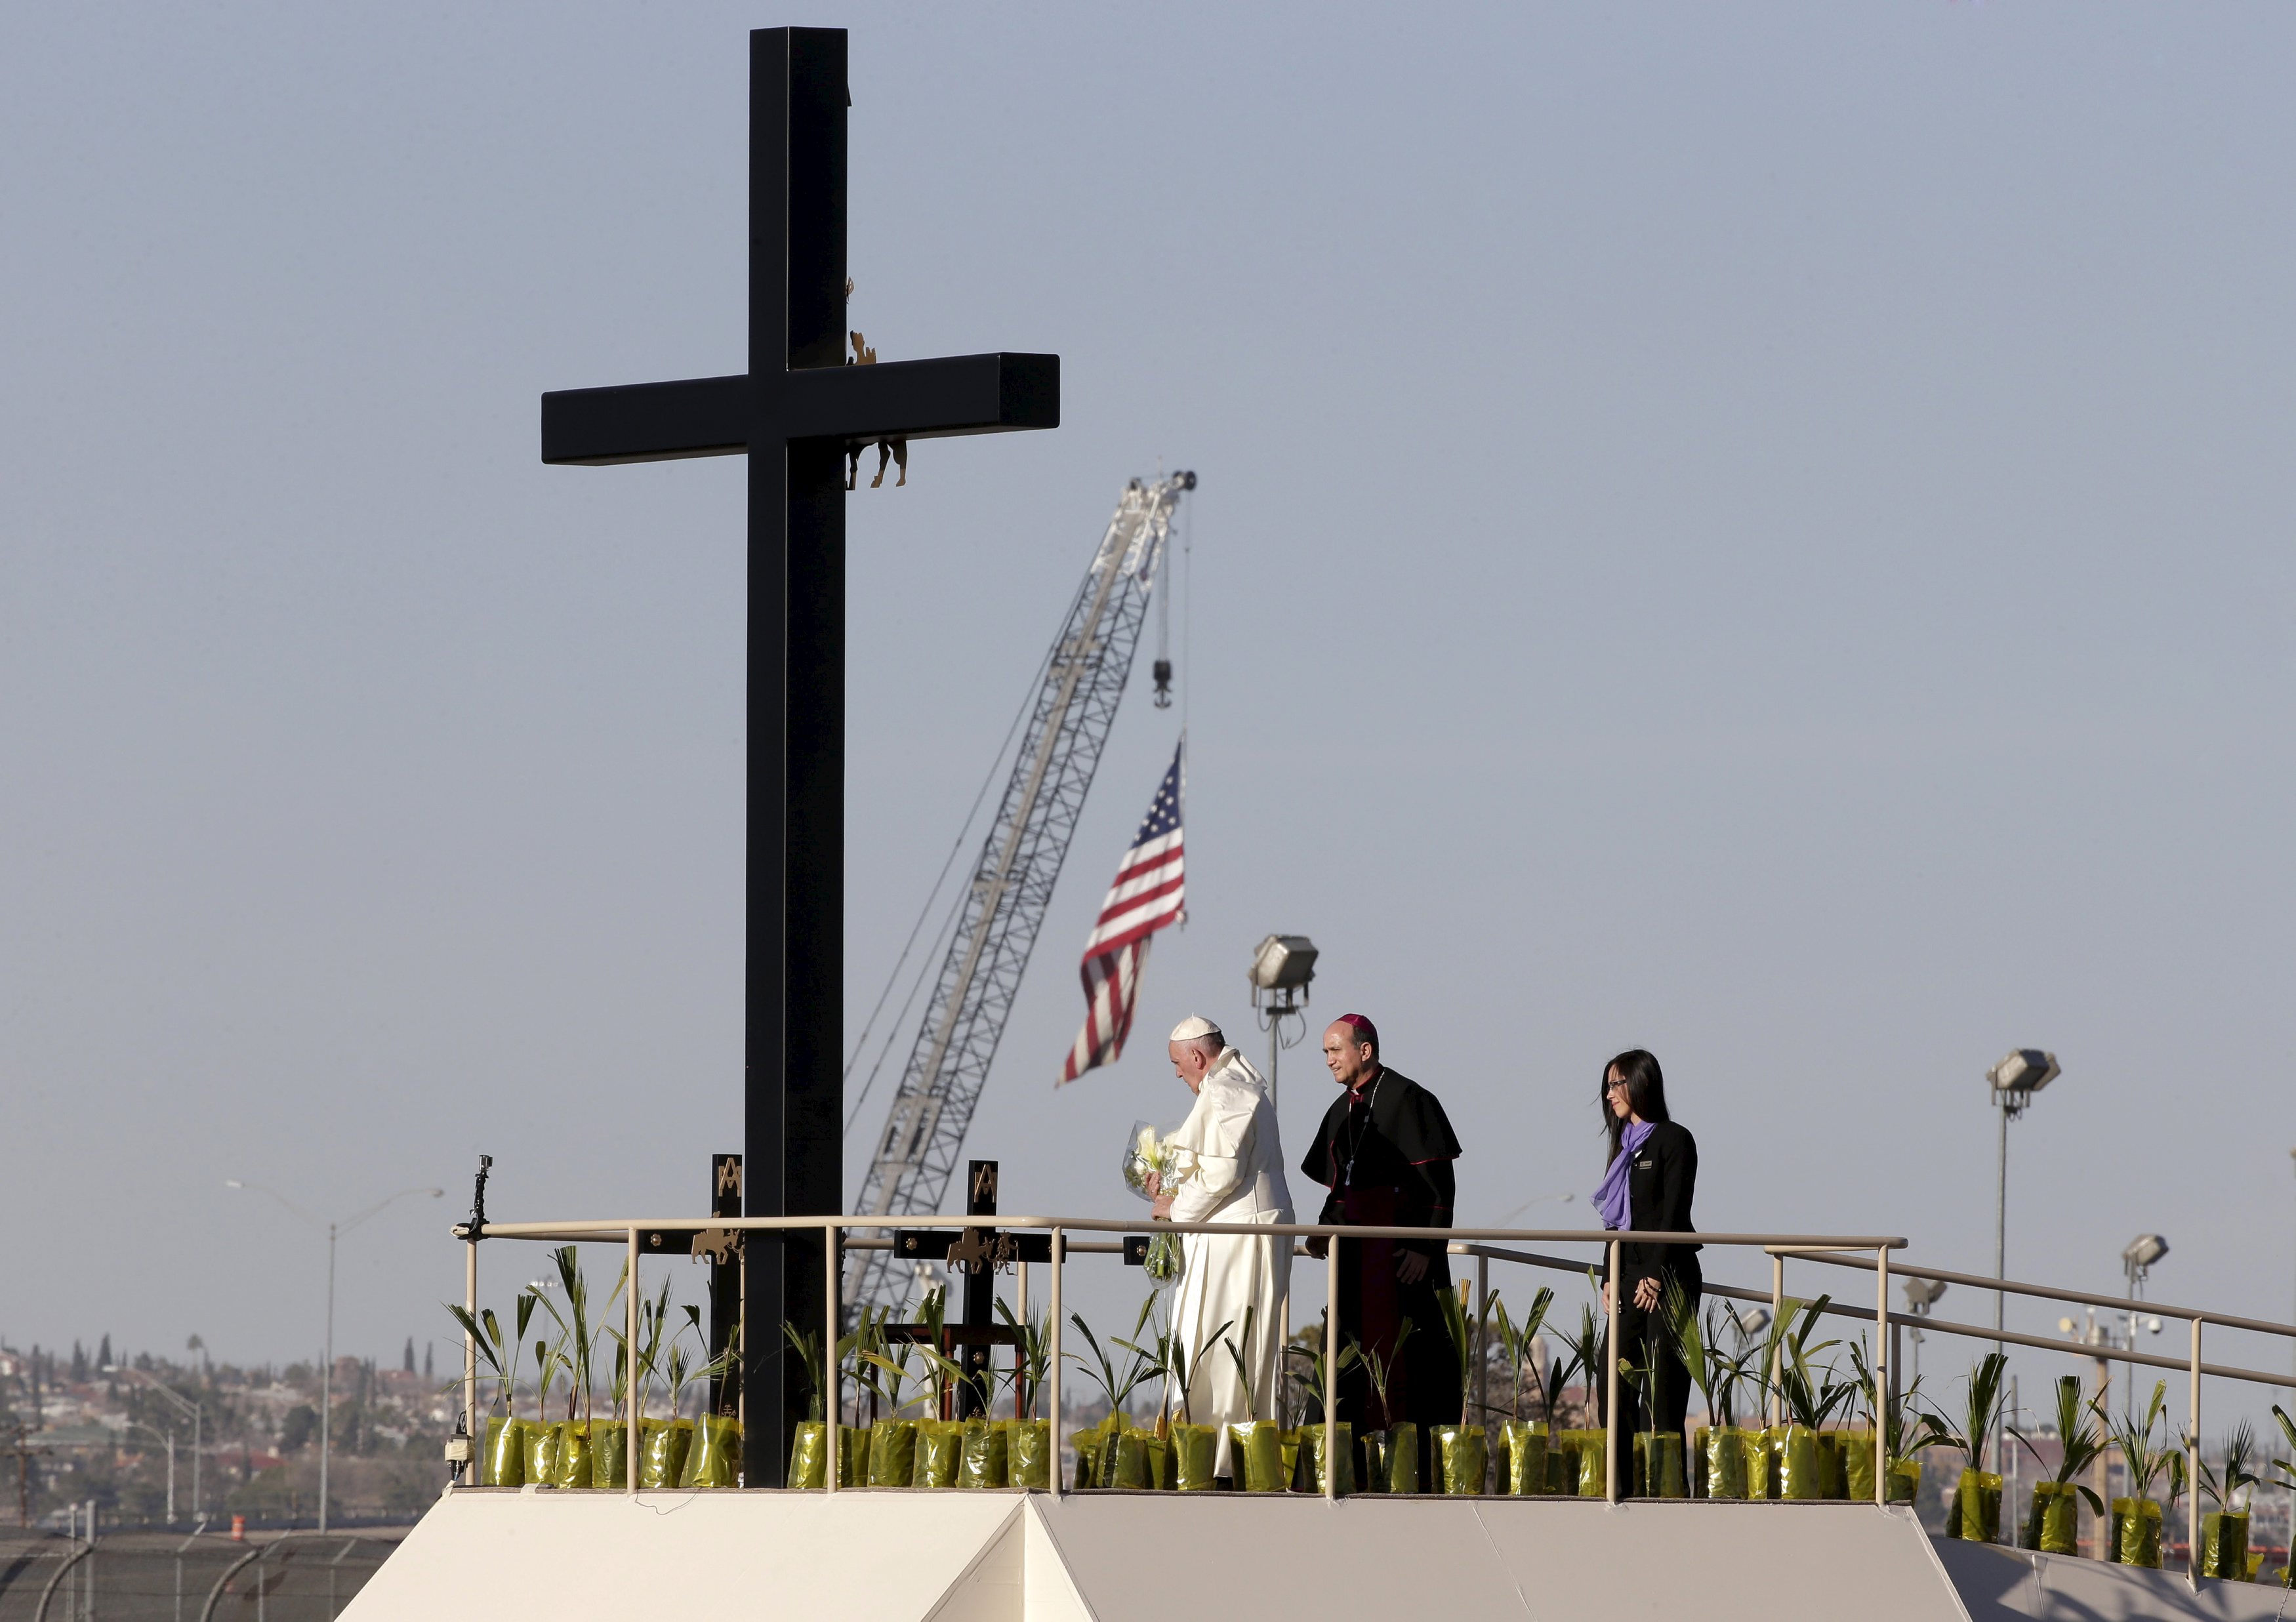 Pope Francis places flowers at a wooden cross at the border between Mexico and the U.S. in Ciudad Juarez, Mexico, Feb. 17. (CNS/Reuters/Max Rossi)